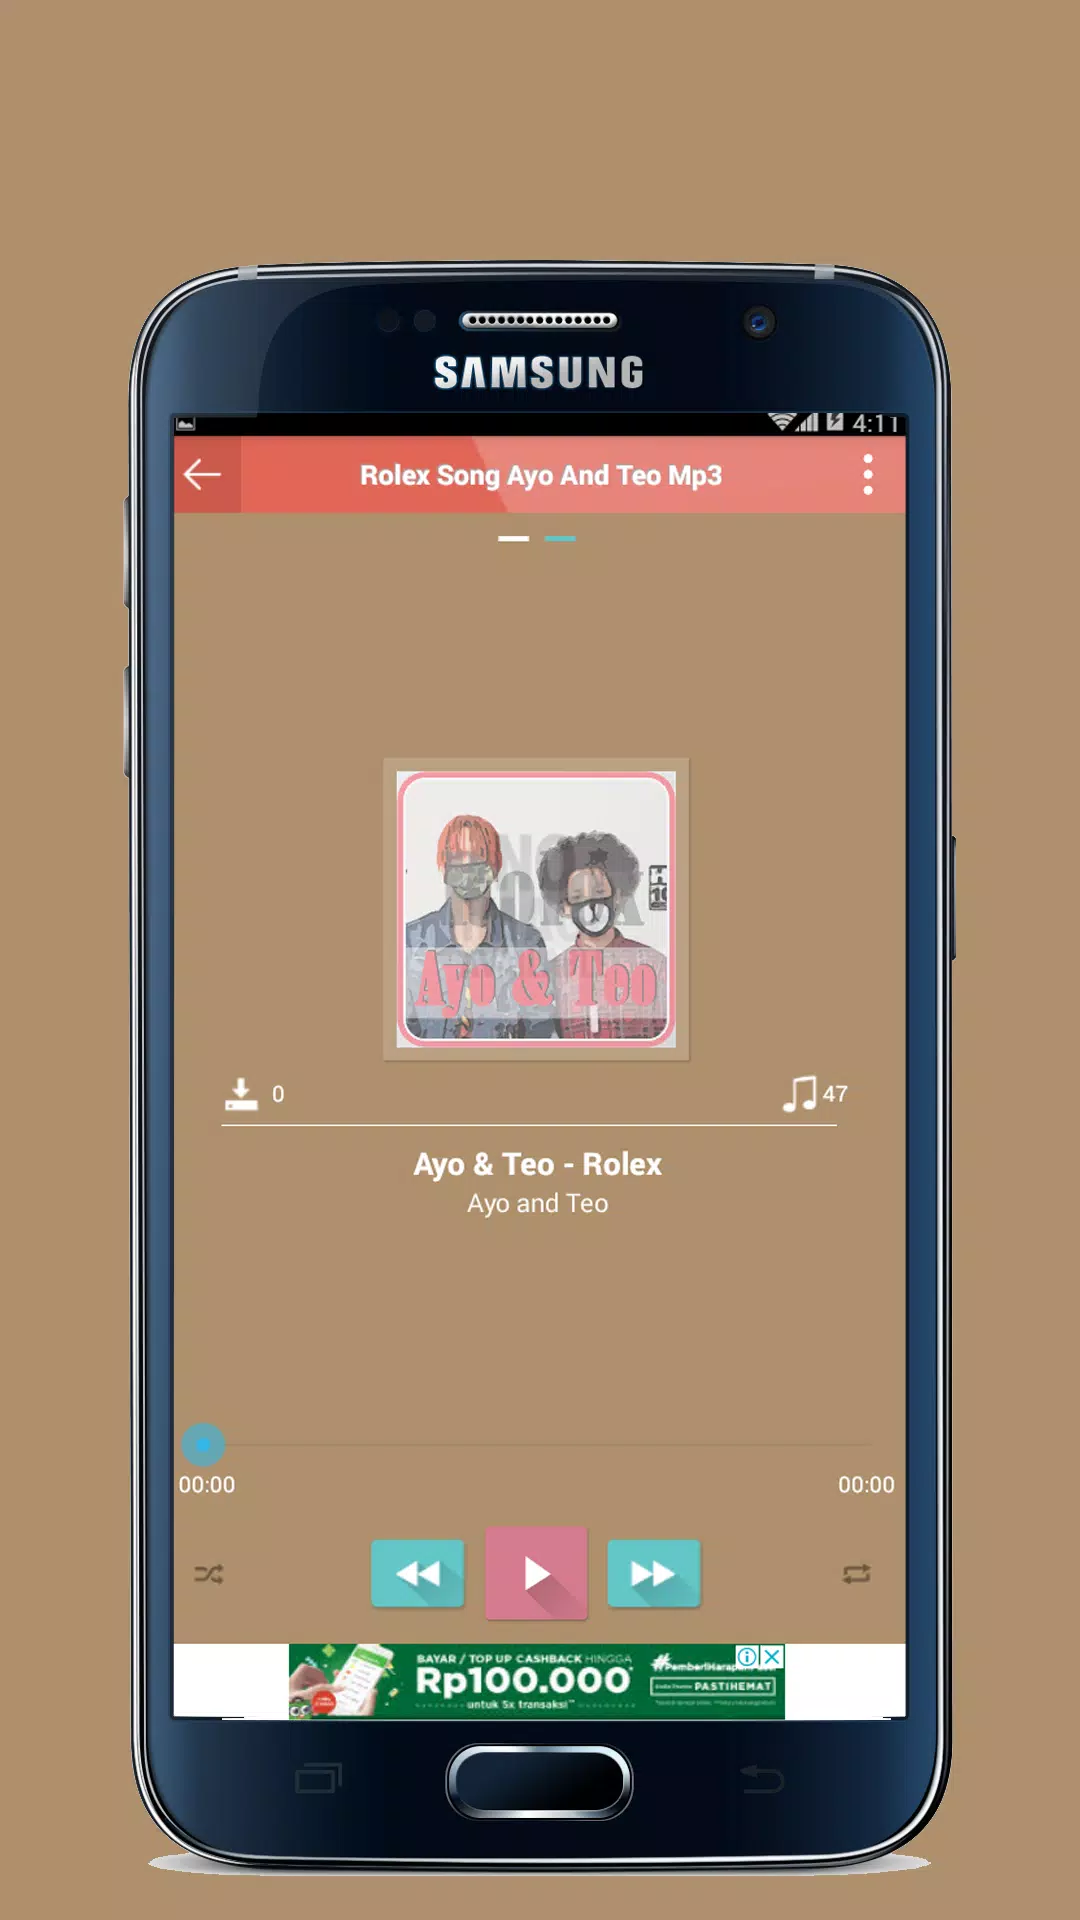 Rolex Song Ayo And Teo for Android - APK Download